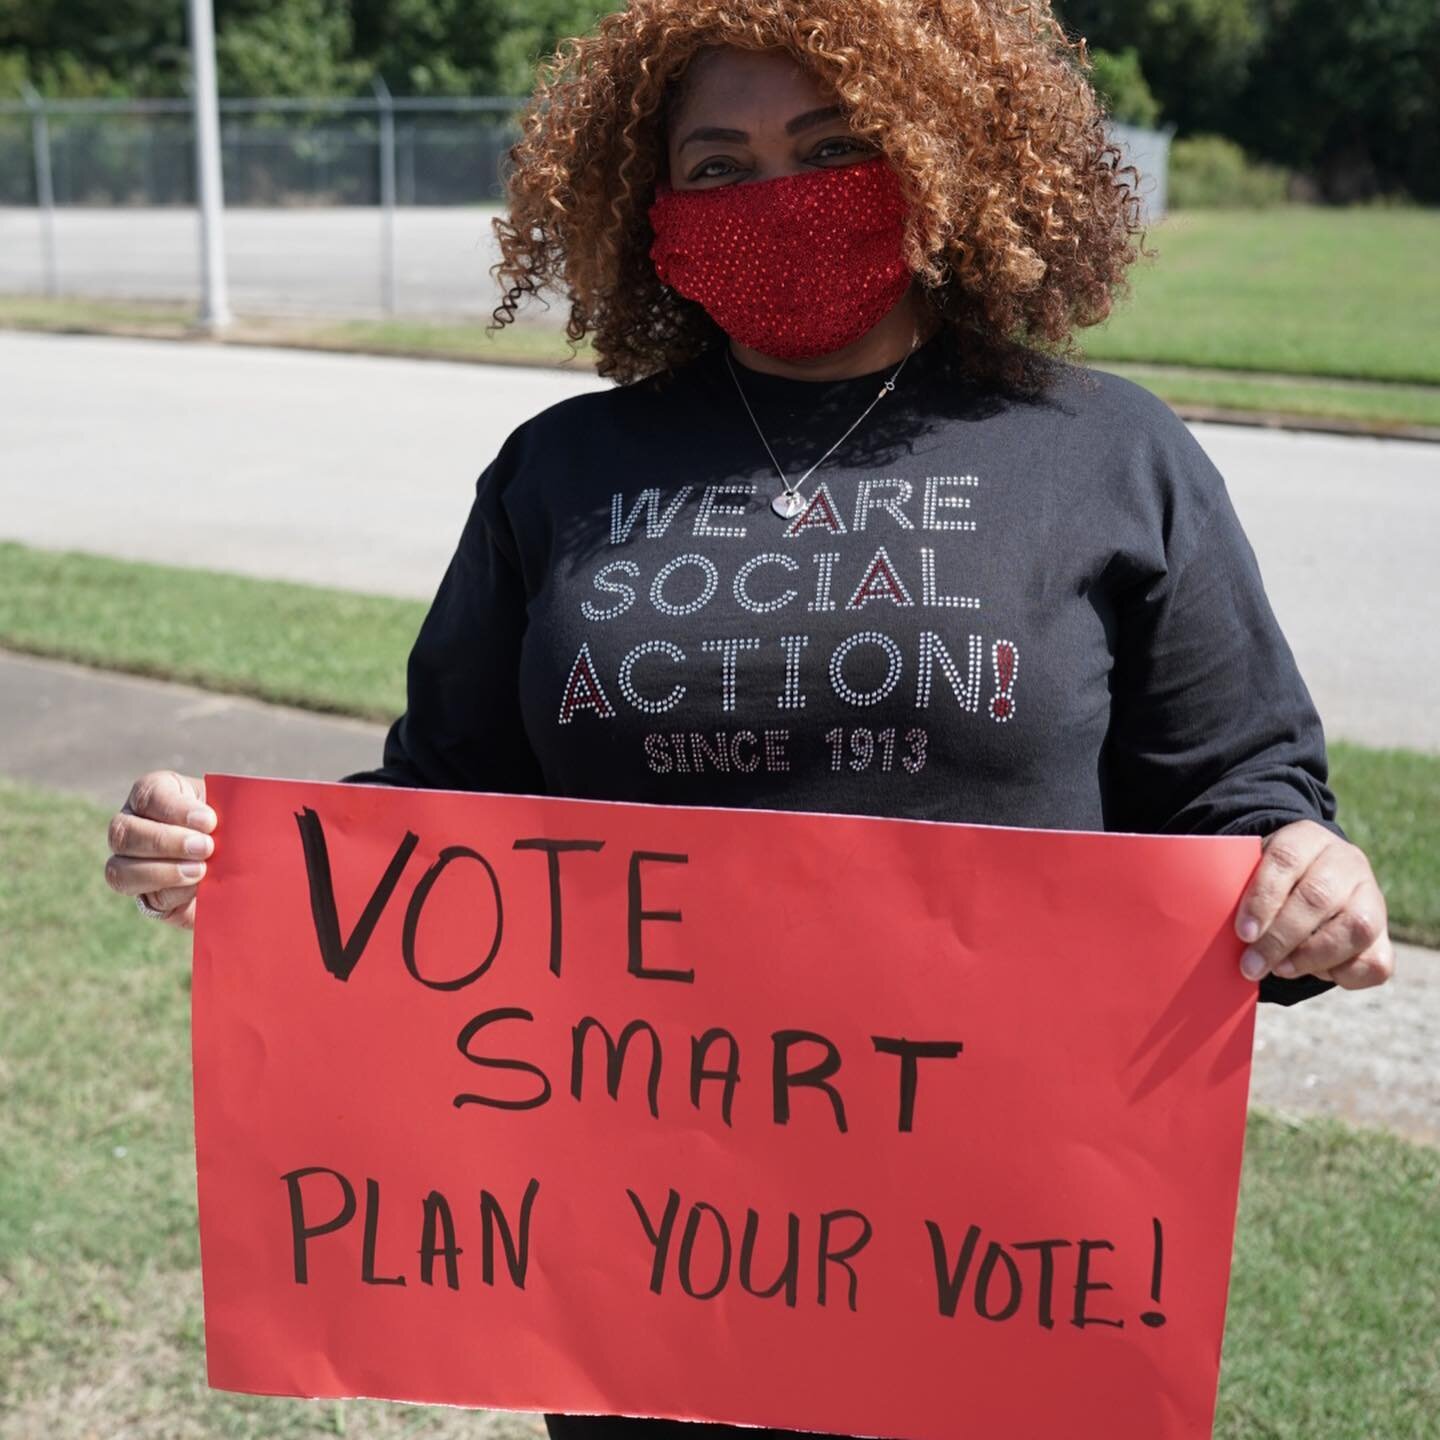 It&rsquo;s National Voter Registration Day! Are you registered to vote? Over the weekend, members of The Society for African American Cultural Awareness, @jacksonequityproject, and other organizations came together to pass out door hangers with infor